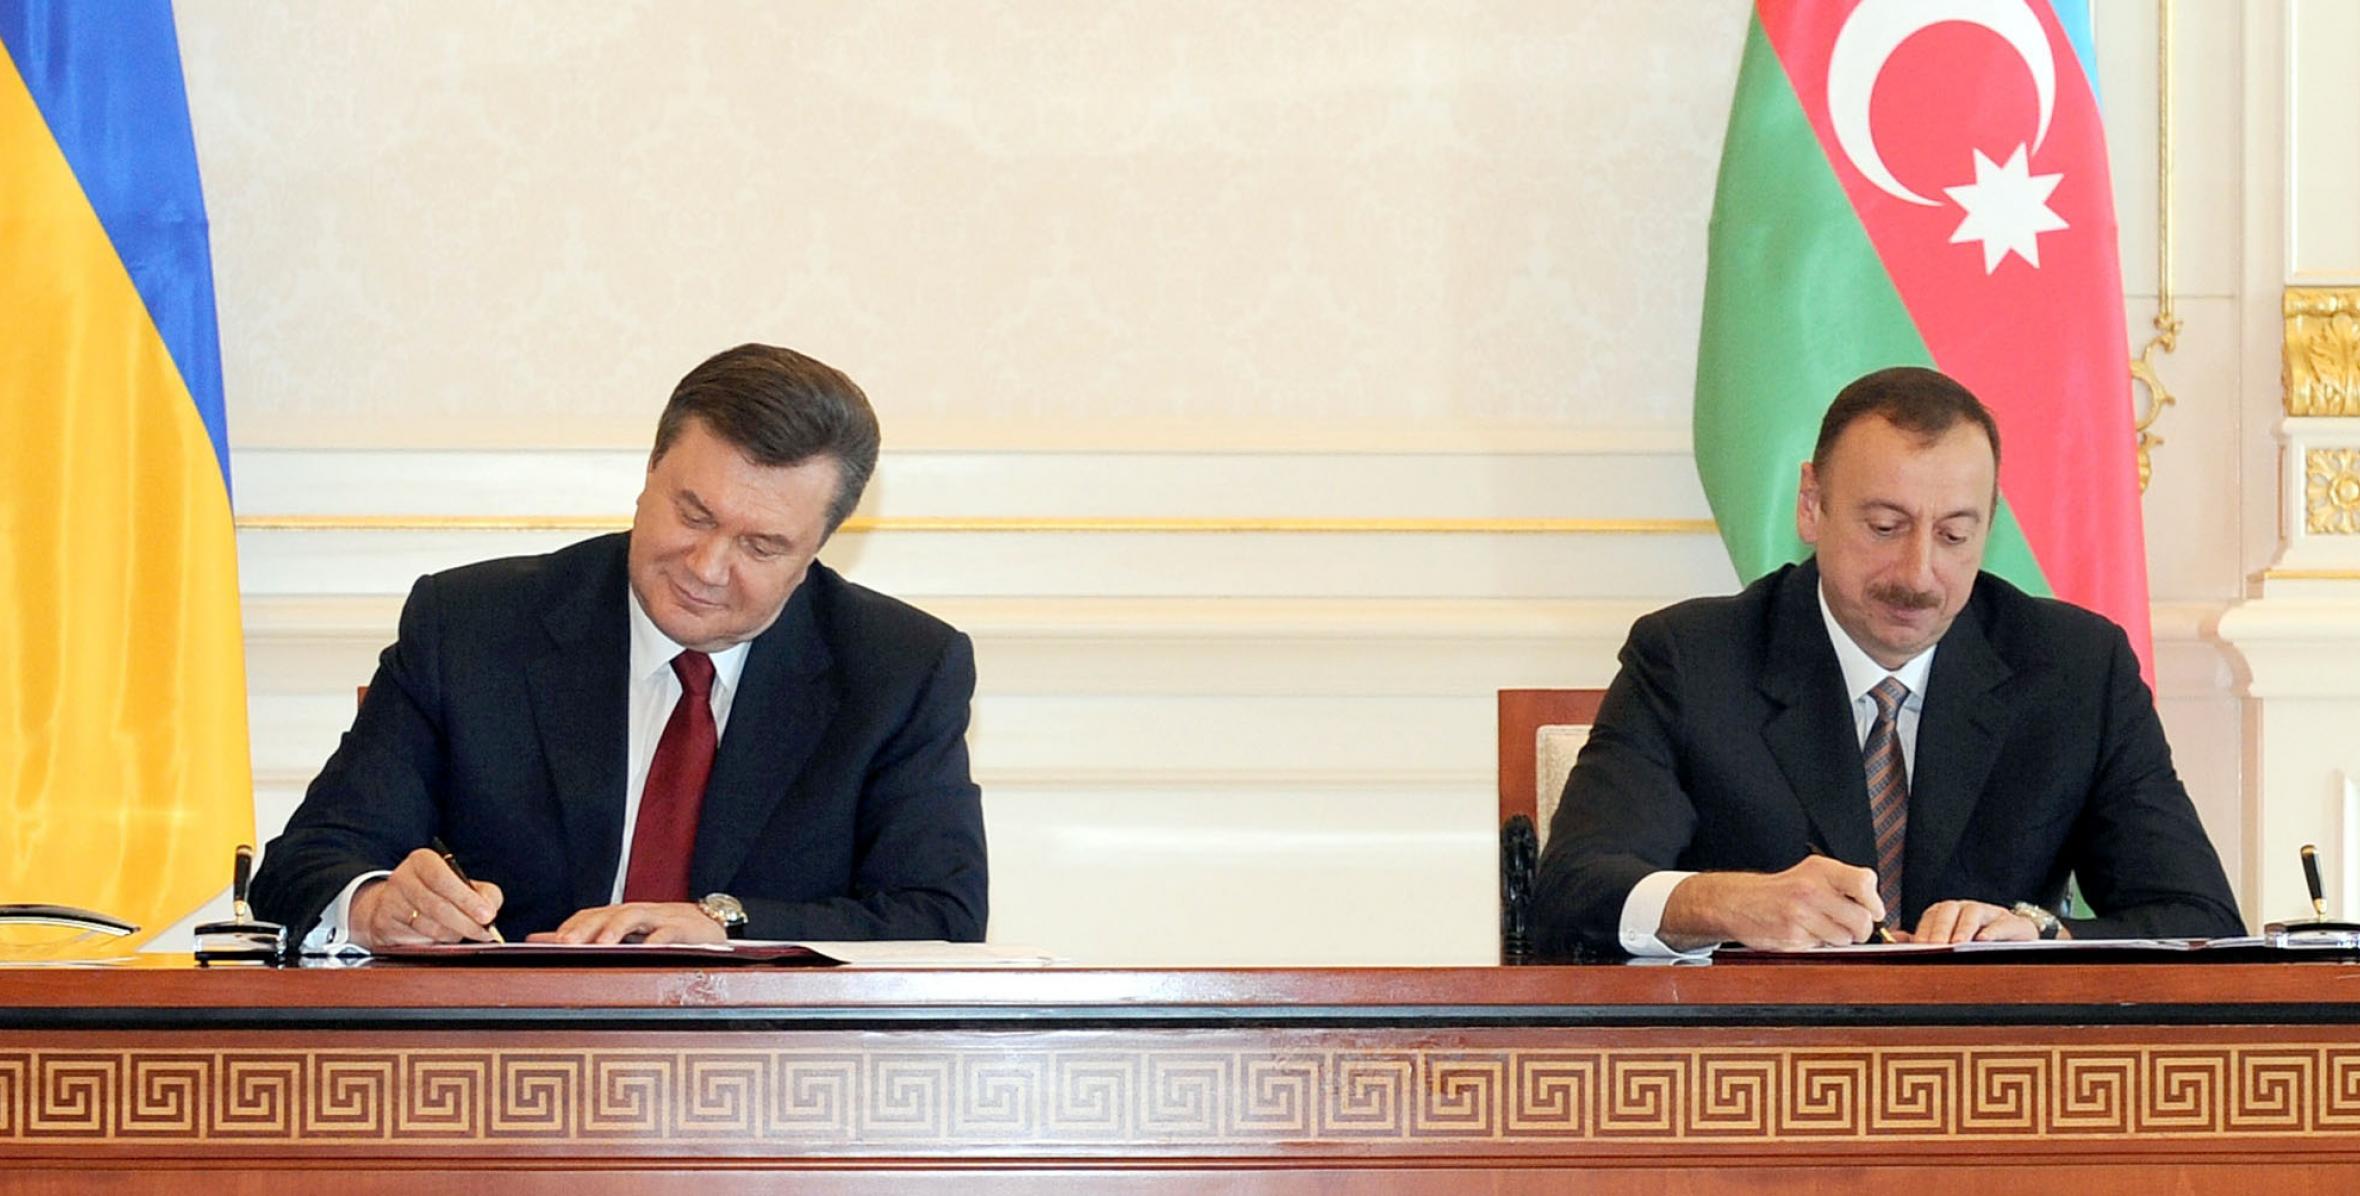 A document signing ceremony took place between Azerbaijan and Ukraine